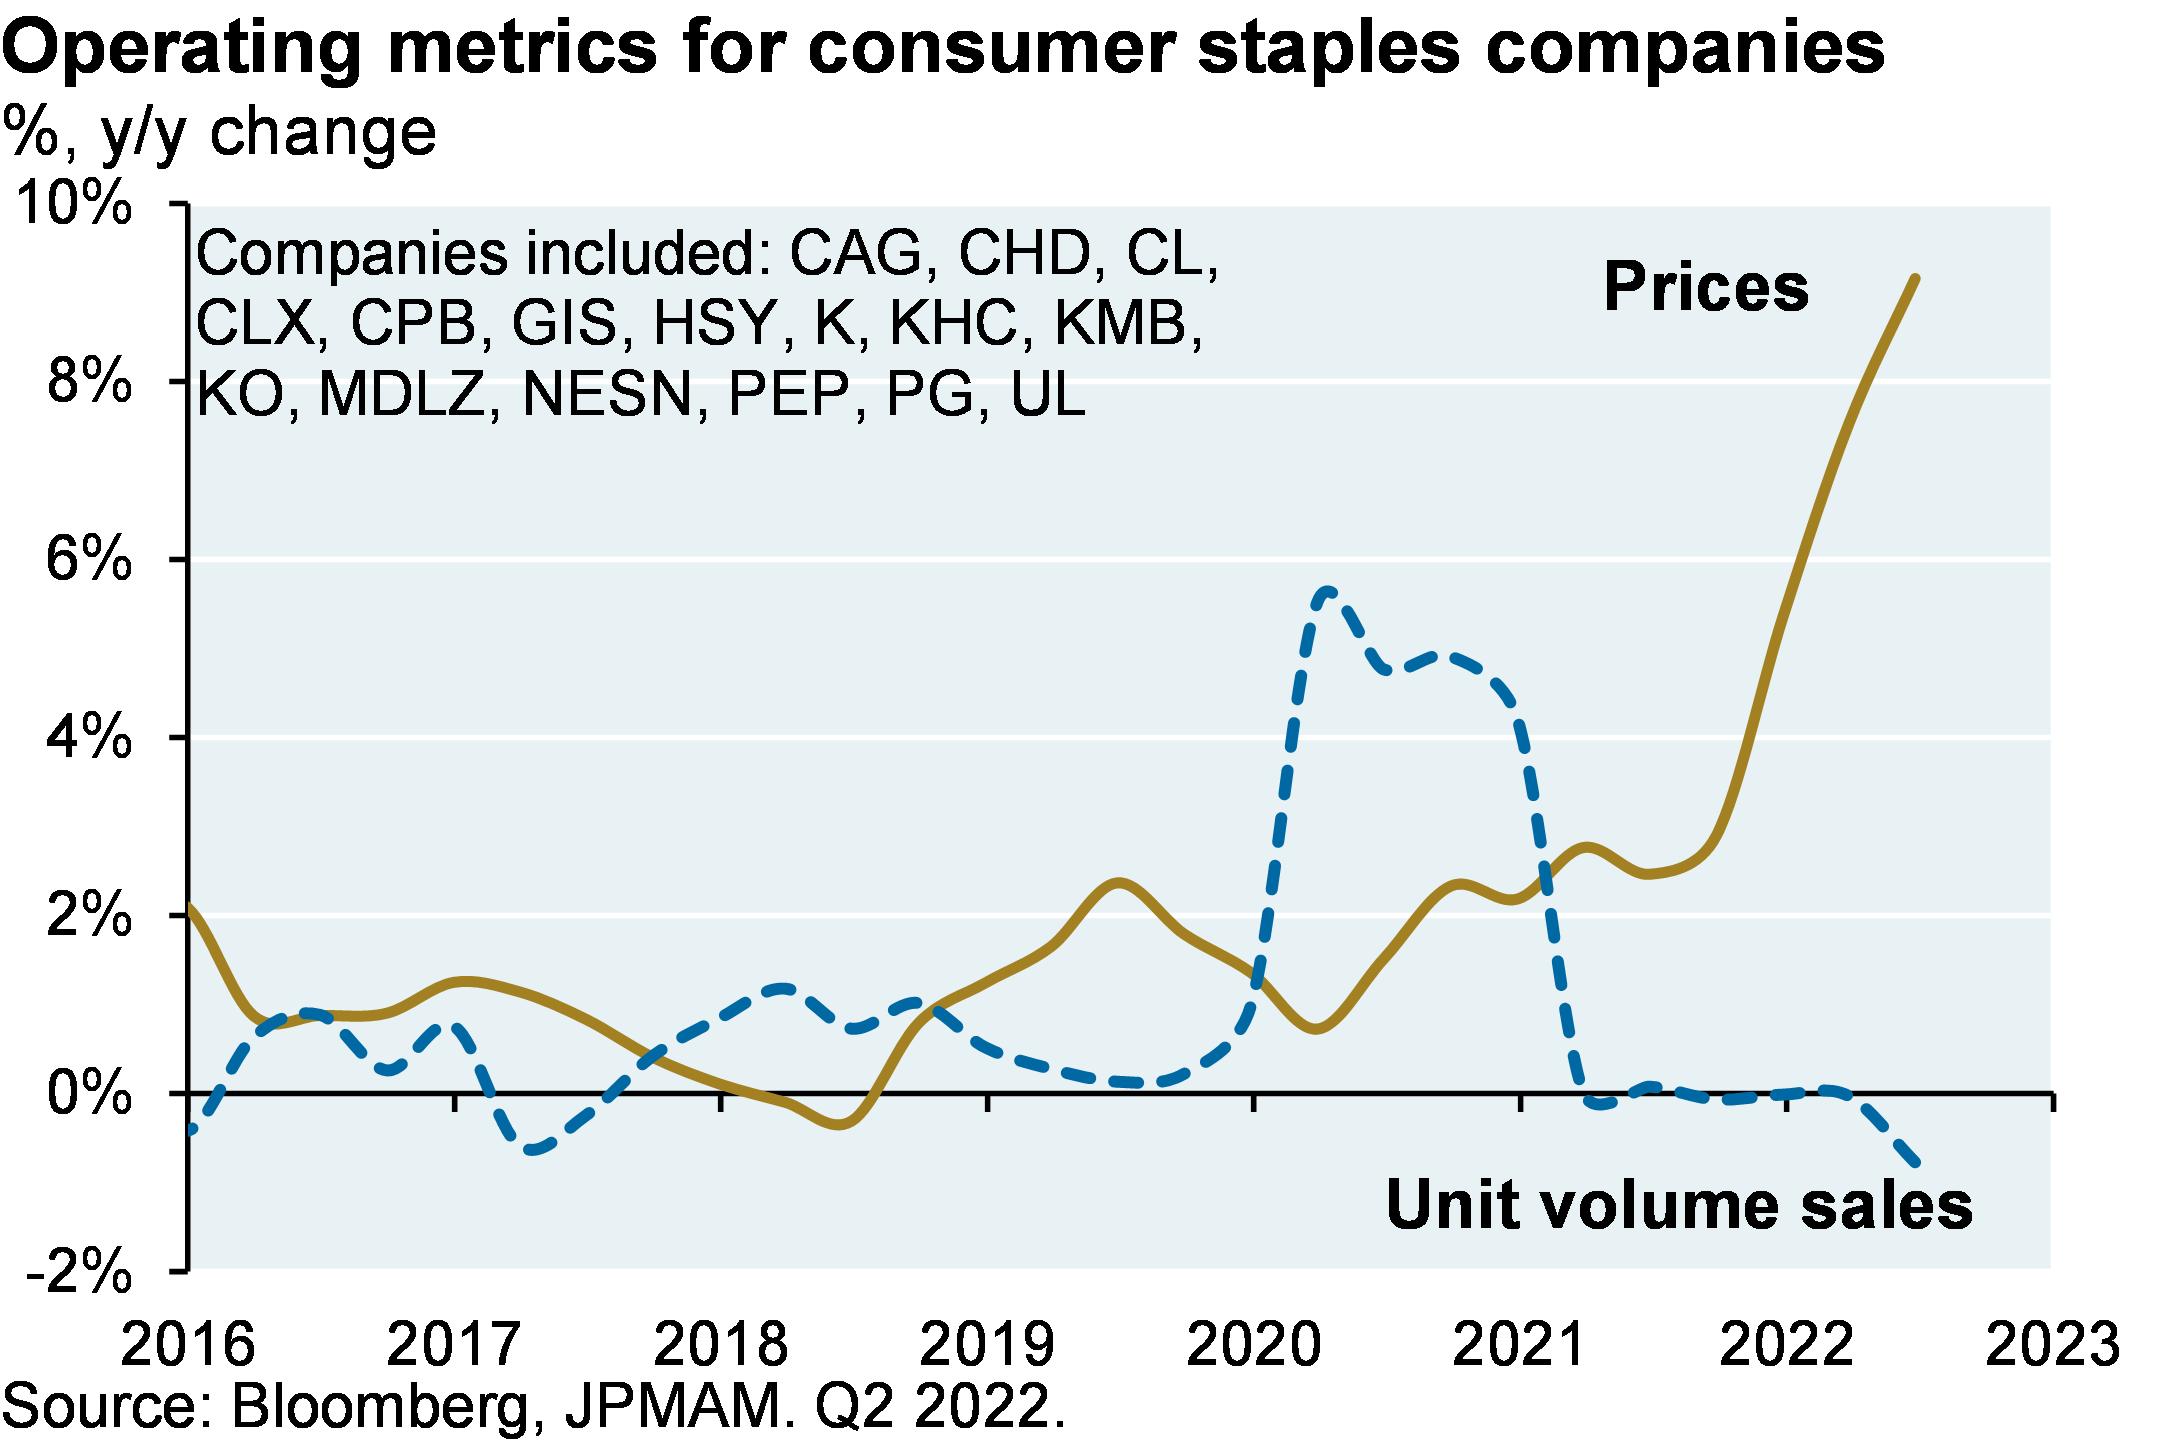 Line chart compares changes in price to unit volume sales year-over-year from 2016 to Q2 2022 for a basket of 16 consumer staples companies: CAG, CHD, CL, CLX, CPB, GIS, HSY, K, KHC, KMB, KO, MDLZ, NESN, PEP, PG, and UL. The chart shows prices have grown 9.2% y/y while unit volume sales have declined 0.8% y/y, suggesting Q2 sector revenues are increasing as a result of price hikes.